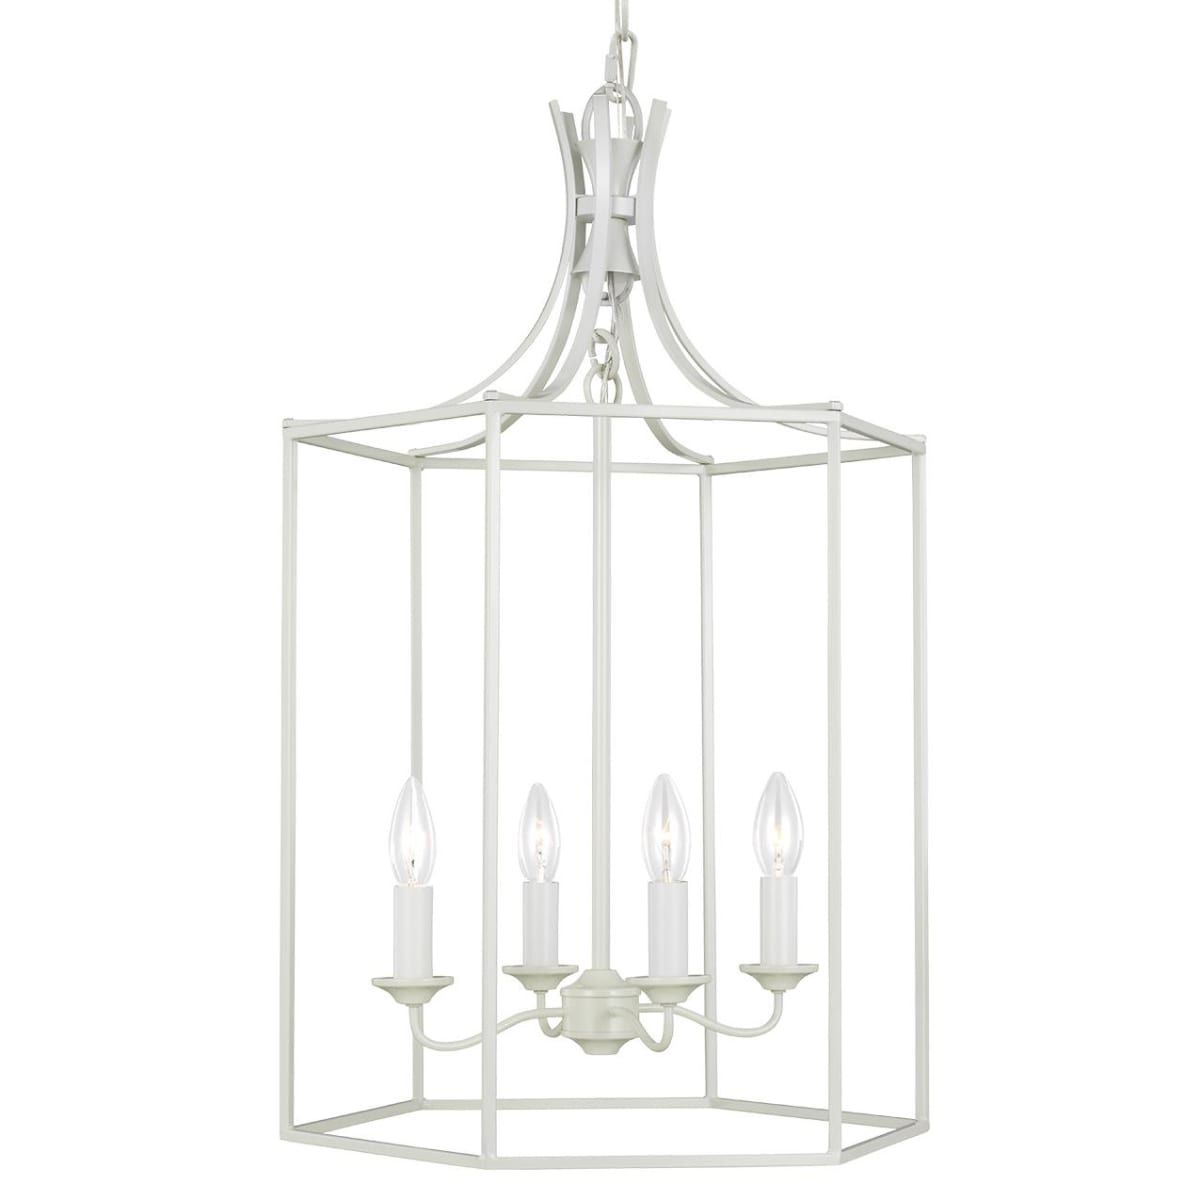 Generation Lighting Ac1014gcm Gloss Cream Bantry House 4 Light 17" Wide  Chandelier – Lightingshowplace For Widely Used Gloss Cream Lantern Chandeliers (View 2 of 15)